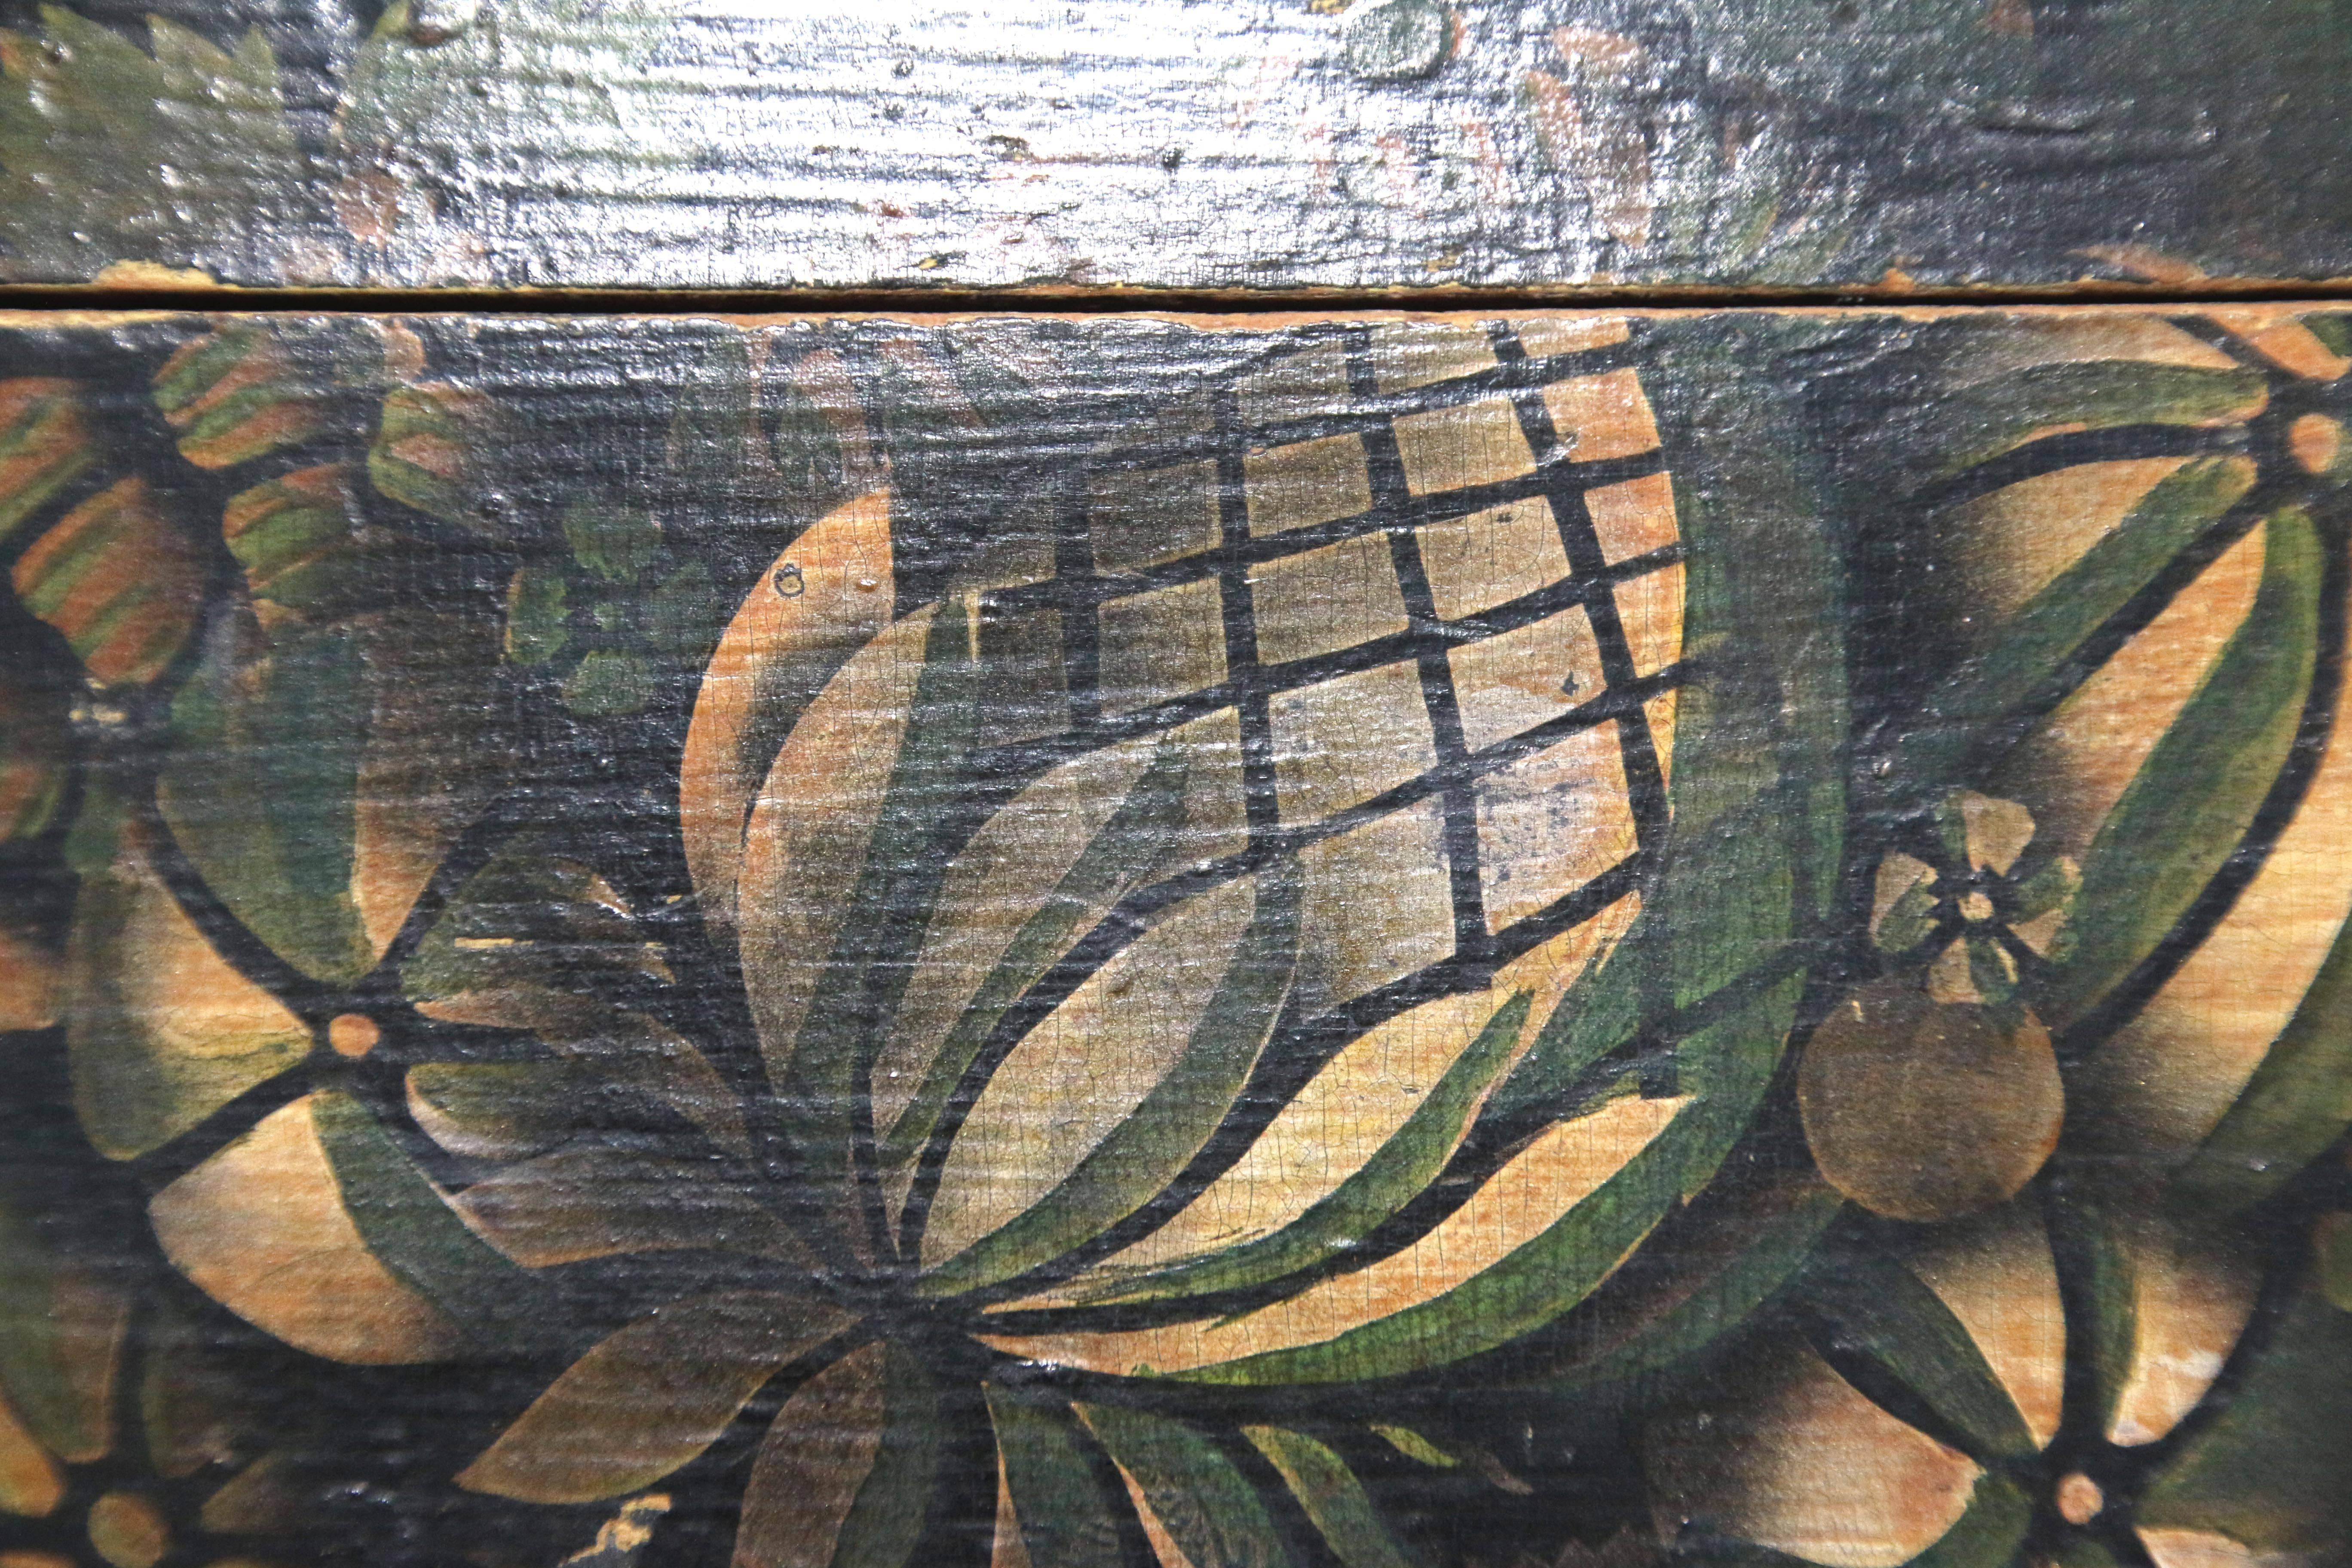 New England stencil decorated pine dresser box retaining its original gold and green fruit and floral decoration on black background with gilt edges.

Measures: 4 inches deep by 9.375 inches wide by 4.75 inches high.

Overall excellent